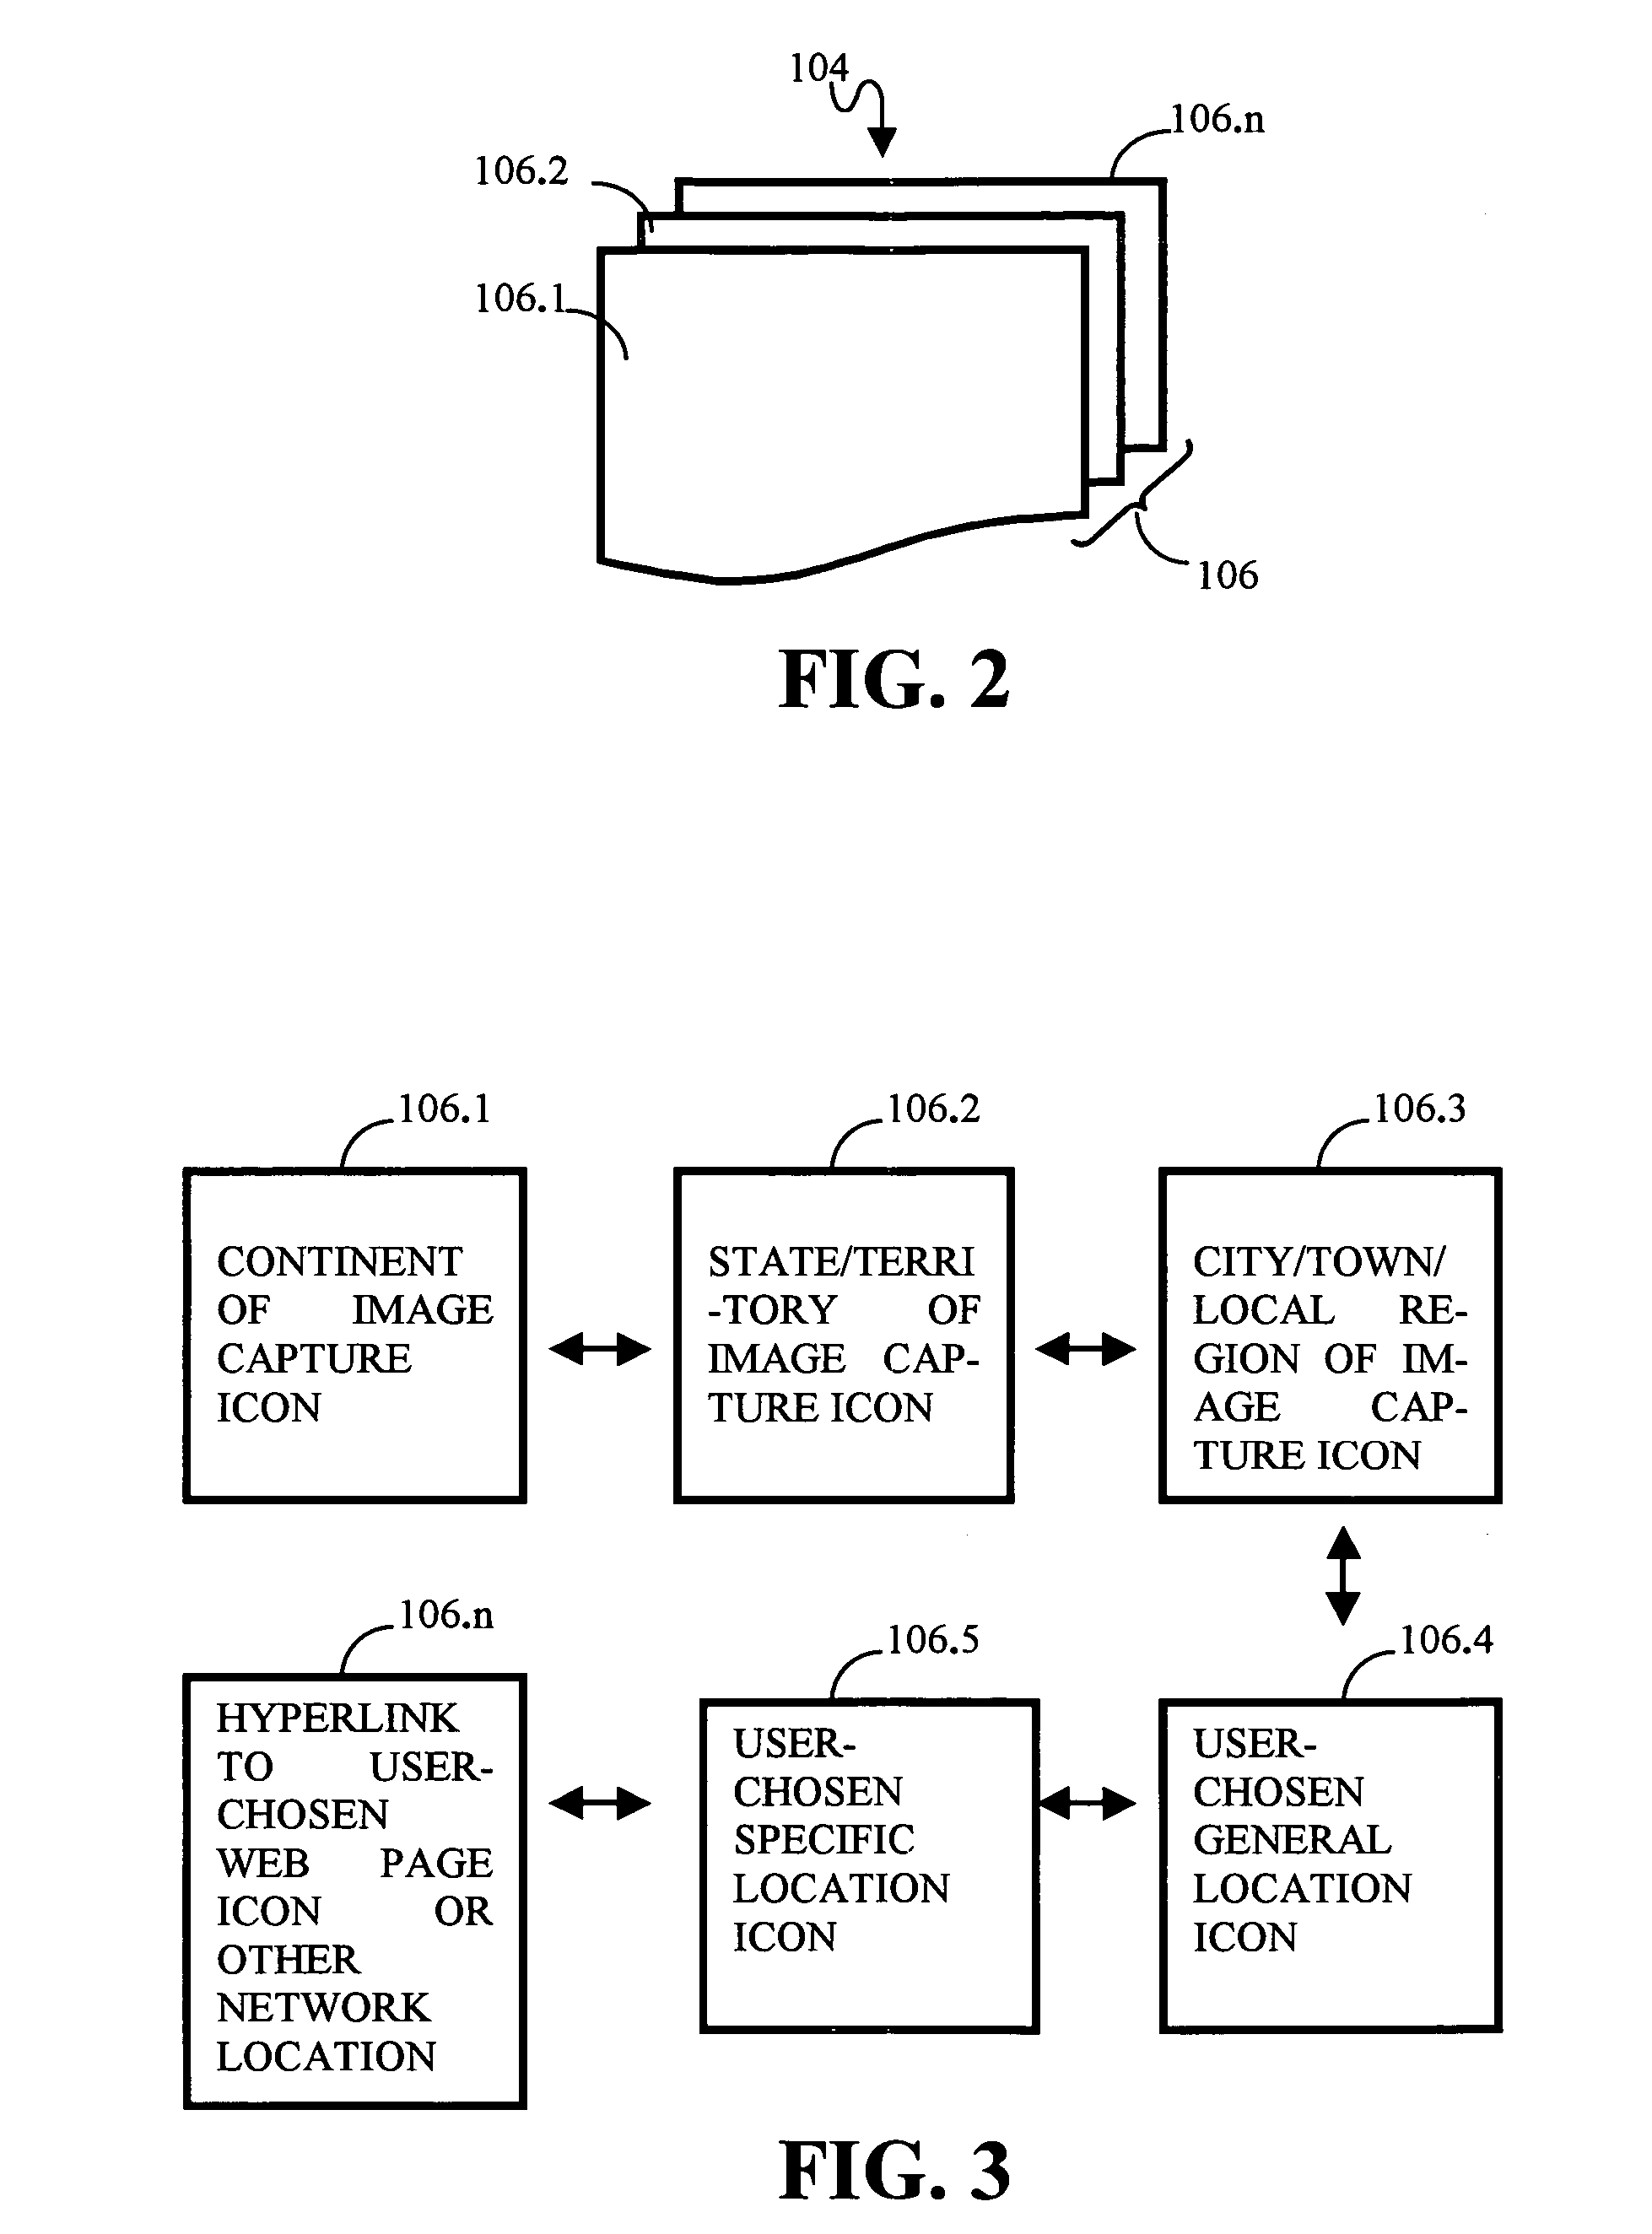 Method and apparatus for producing digital images with embedded image capture location icons